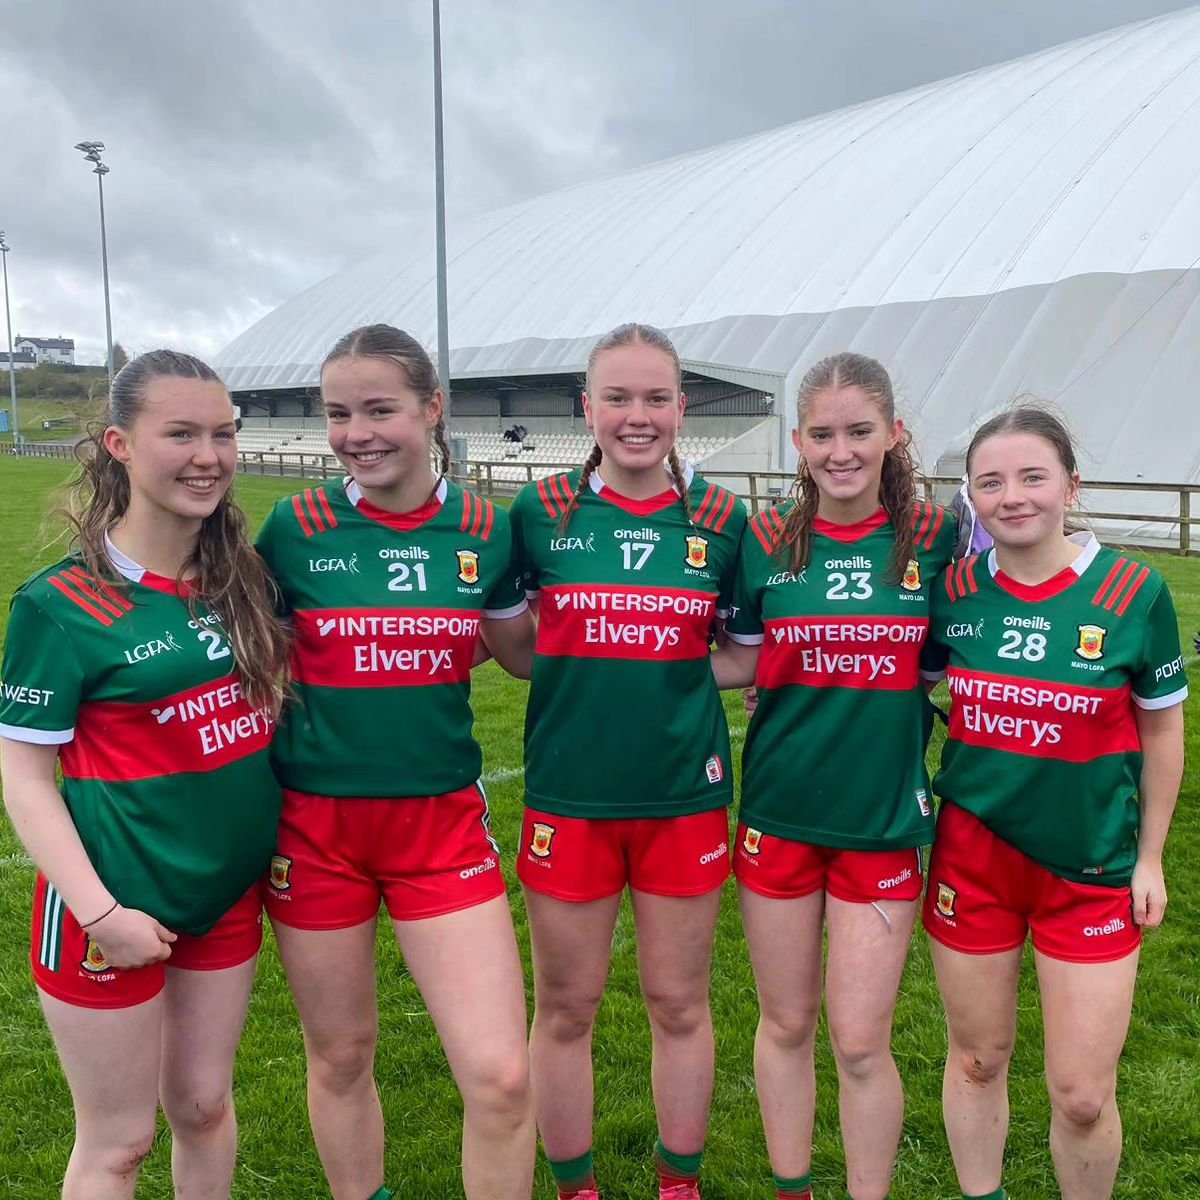 Congratulations to Anna Hanly, Chloe Fahey, Caoimhe McHale, Emily Moran and Grace Bailey on winning the Connacht Final with the Mayo u16 LGFA team. 
They defeated Galway after extra time! Well done girls! 👏🏻 
💚❤

#mayoladiesgaelicfootball
#stjosep